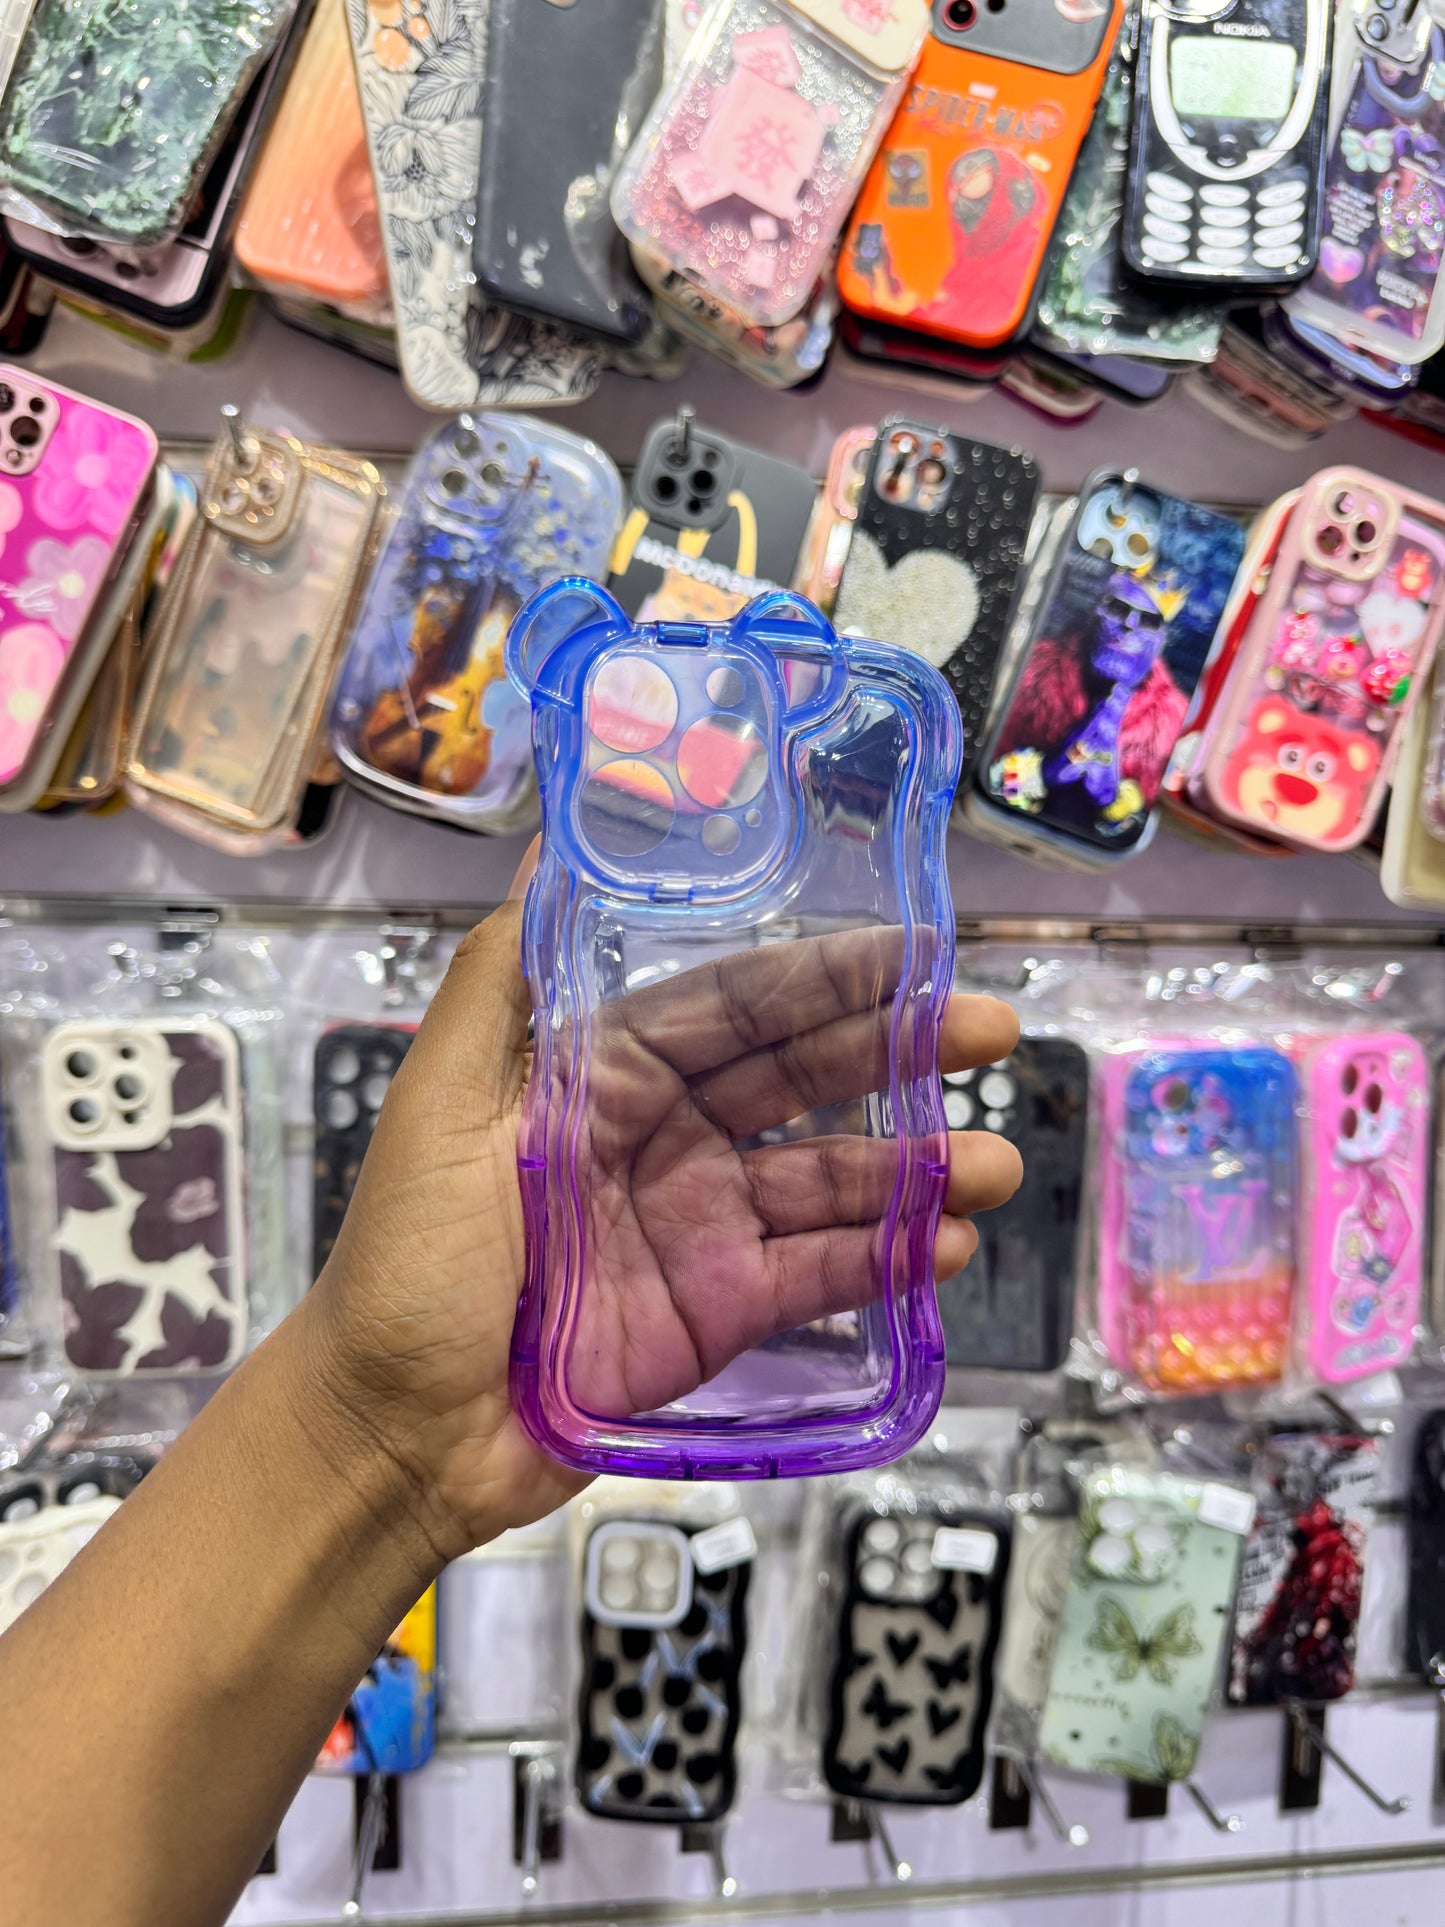 Transparent bear Ears Case For IPhones